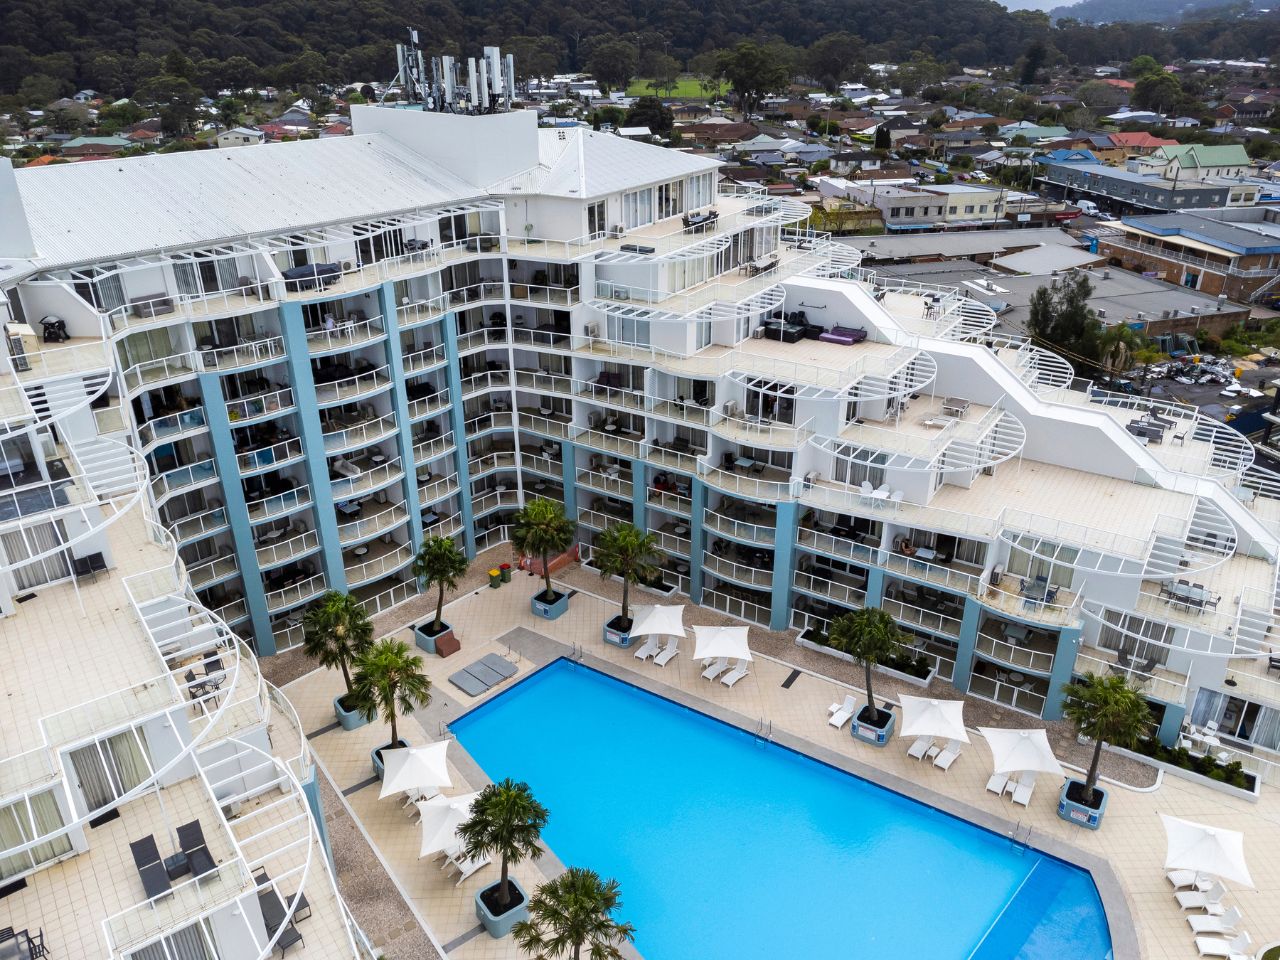 Mitsubishi ALPOLIC NC/A1 DtS non-combustible cladding on façade of the Mantra Ettalong hotel on the NSW Central Coast.